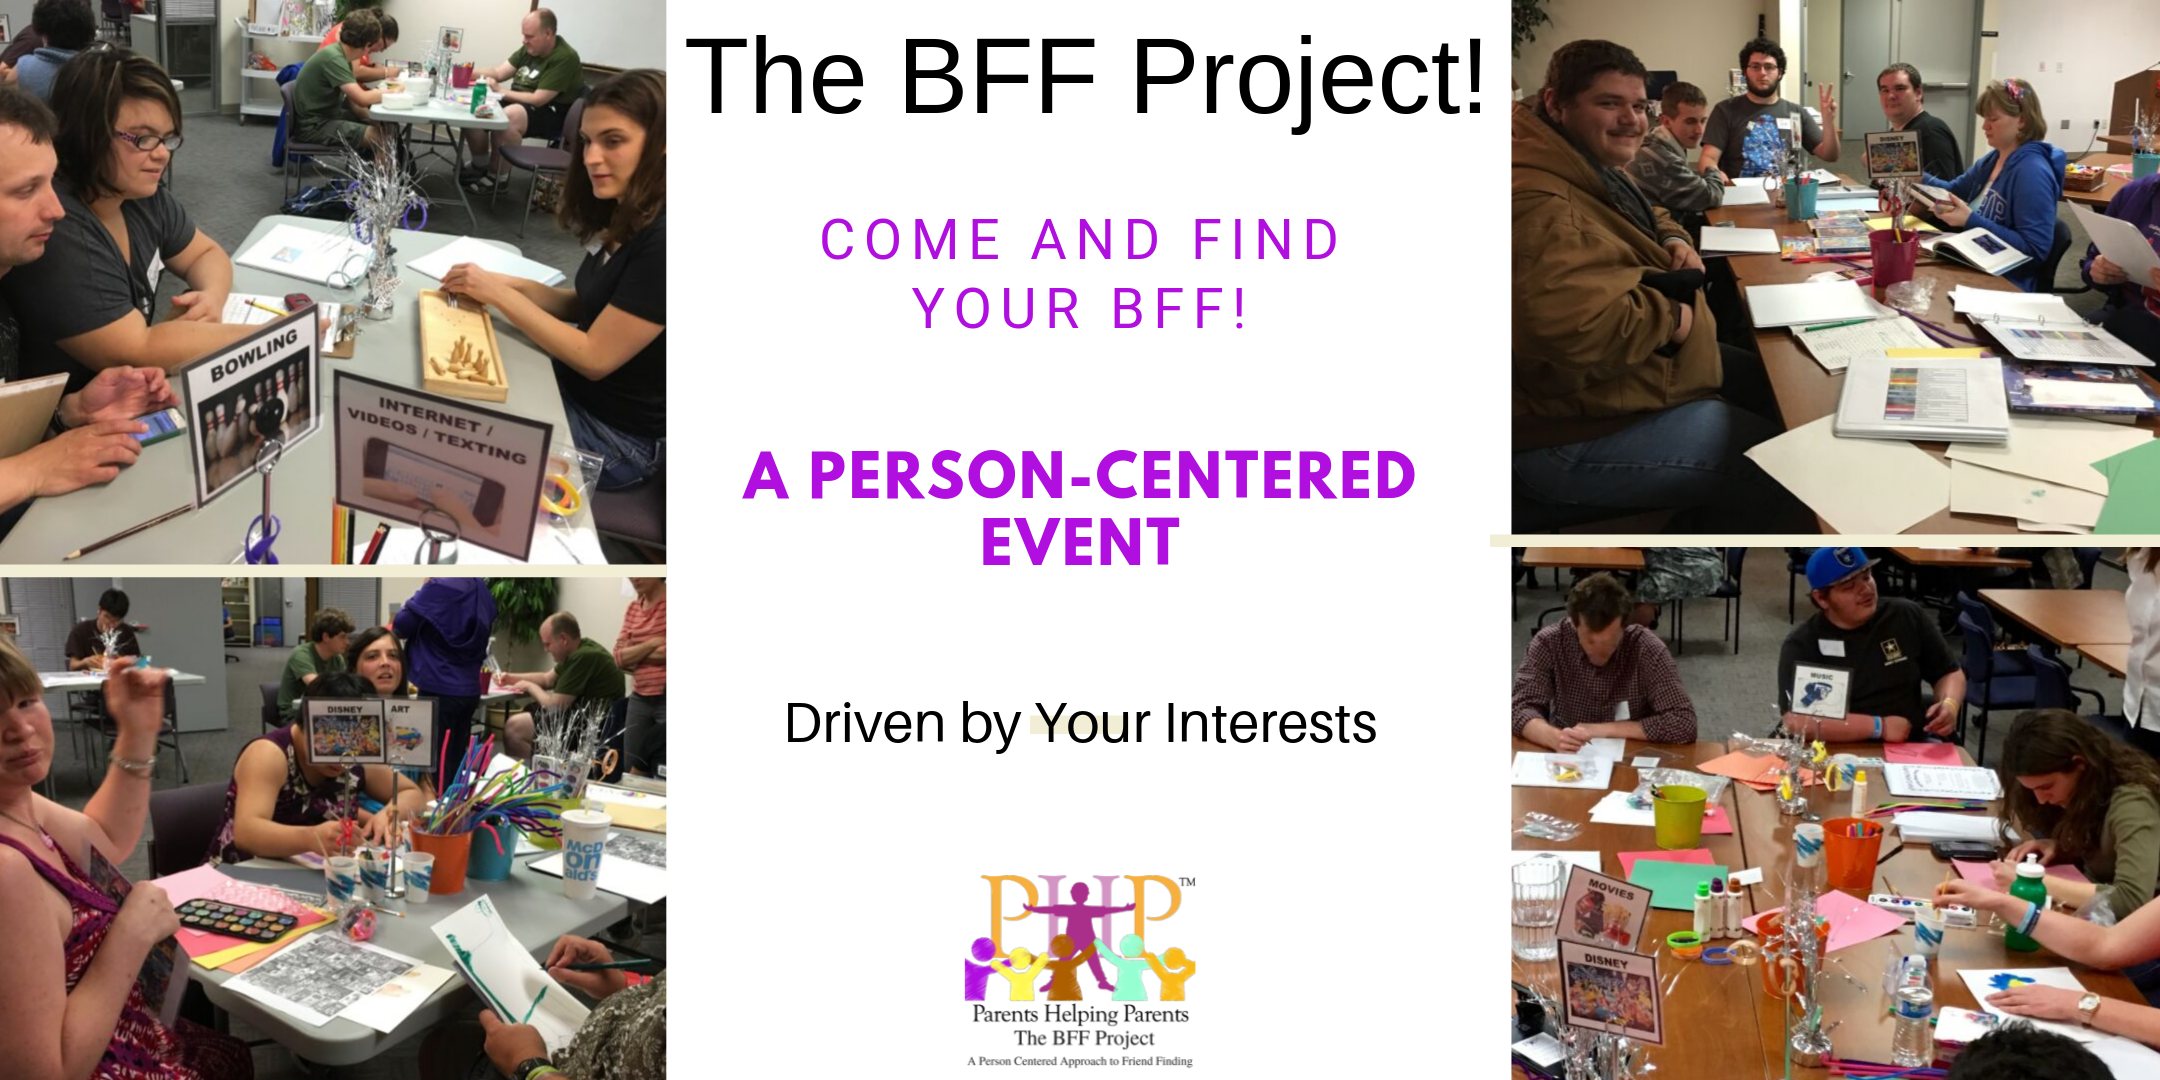 The BFF Project Event for Adult Participants (18+) - 4th Tuesday of the Month